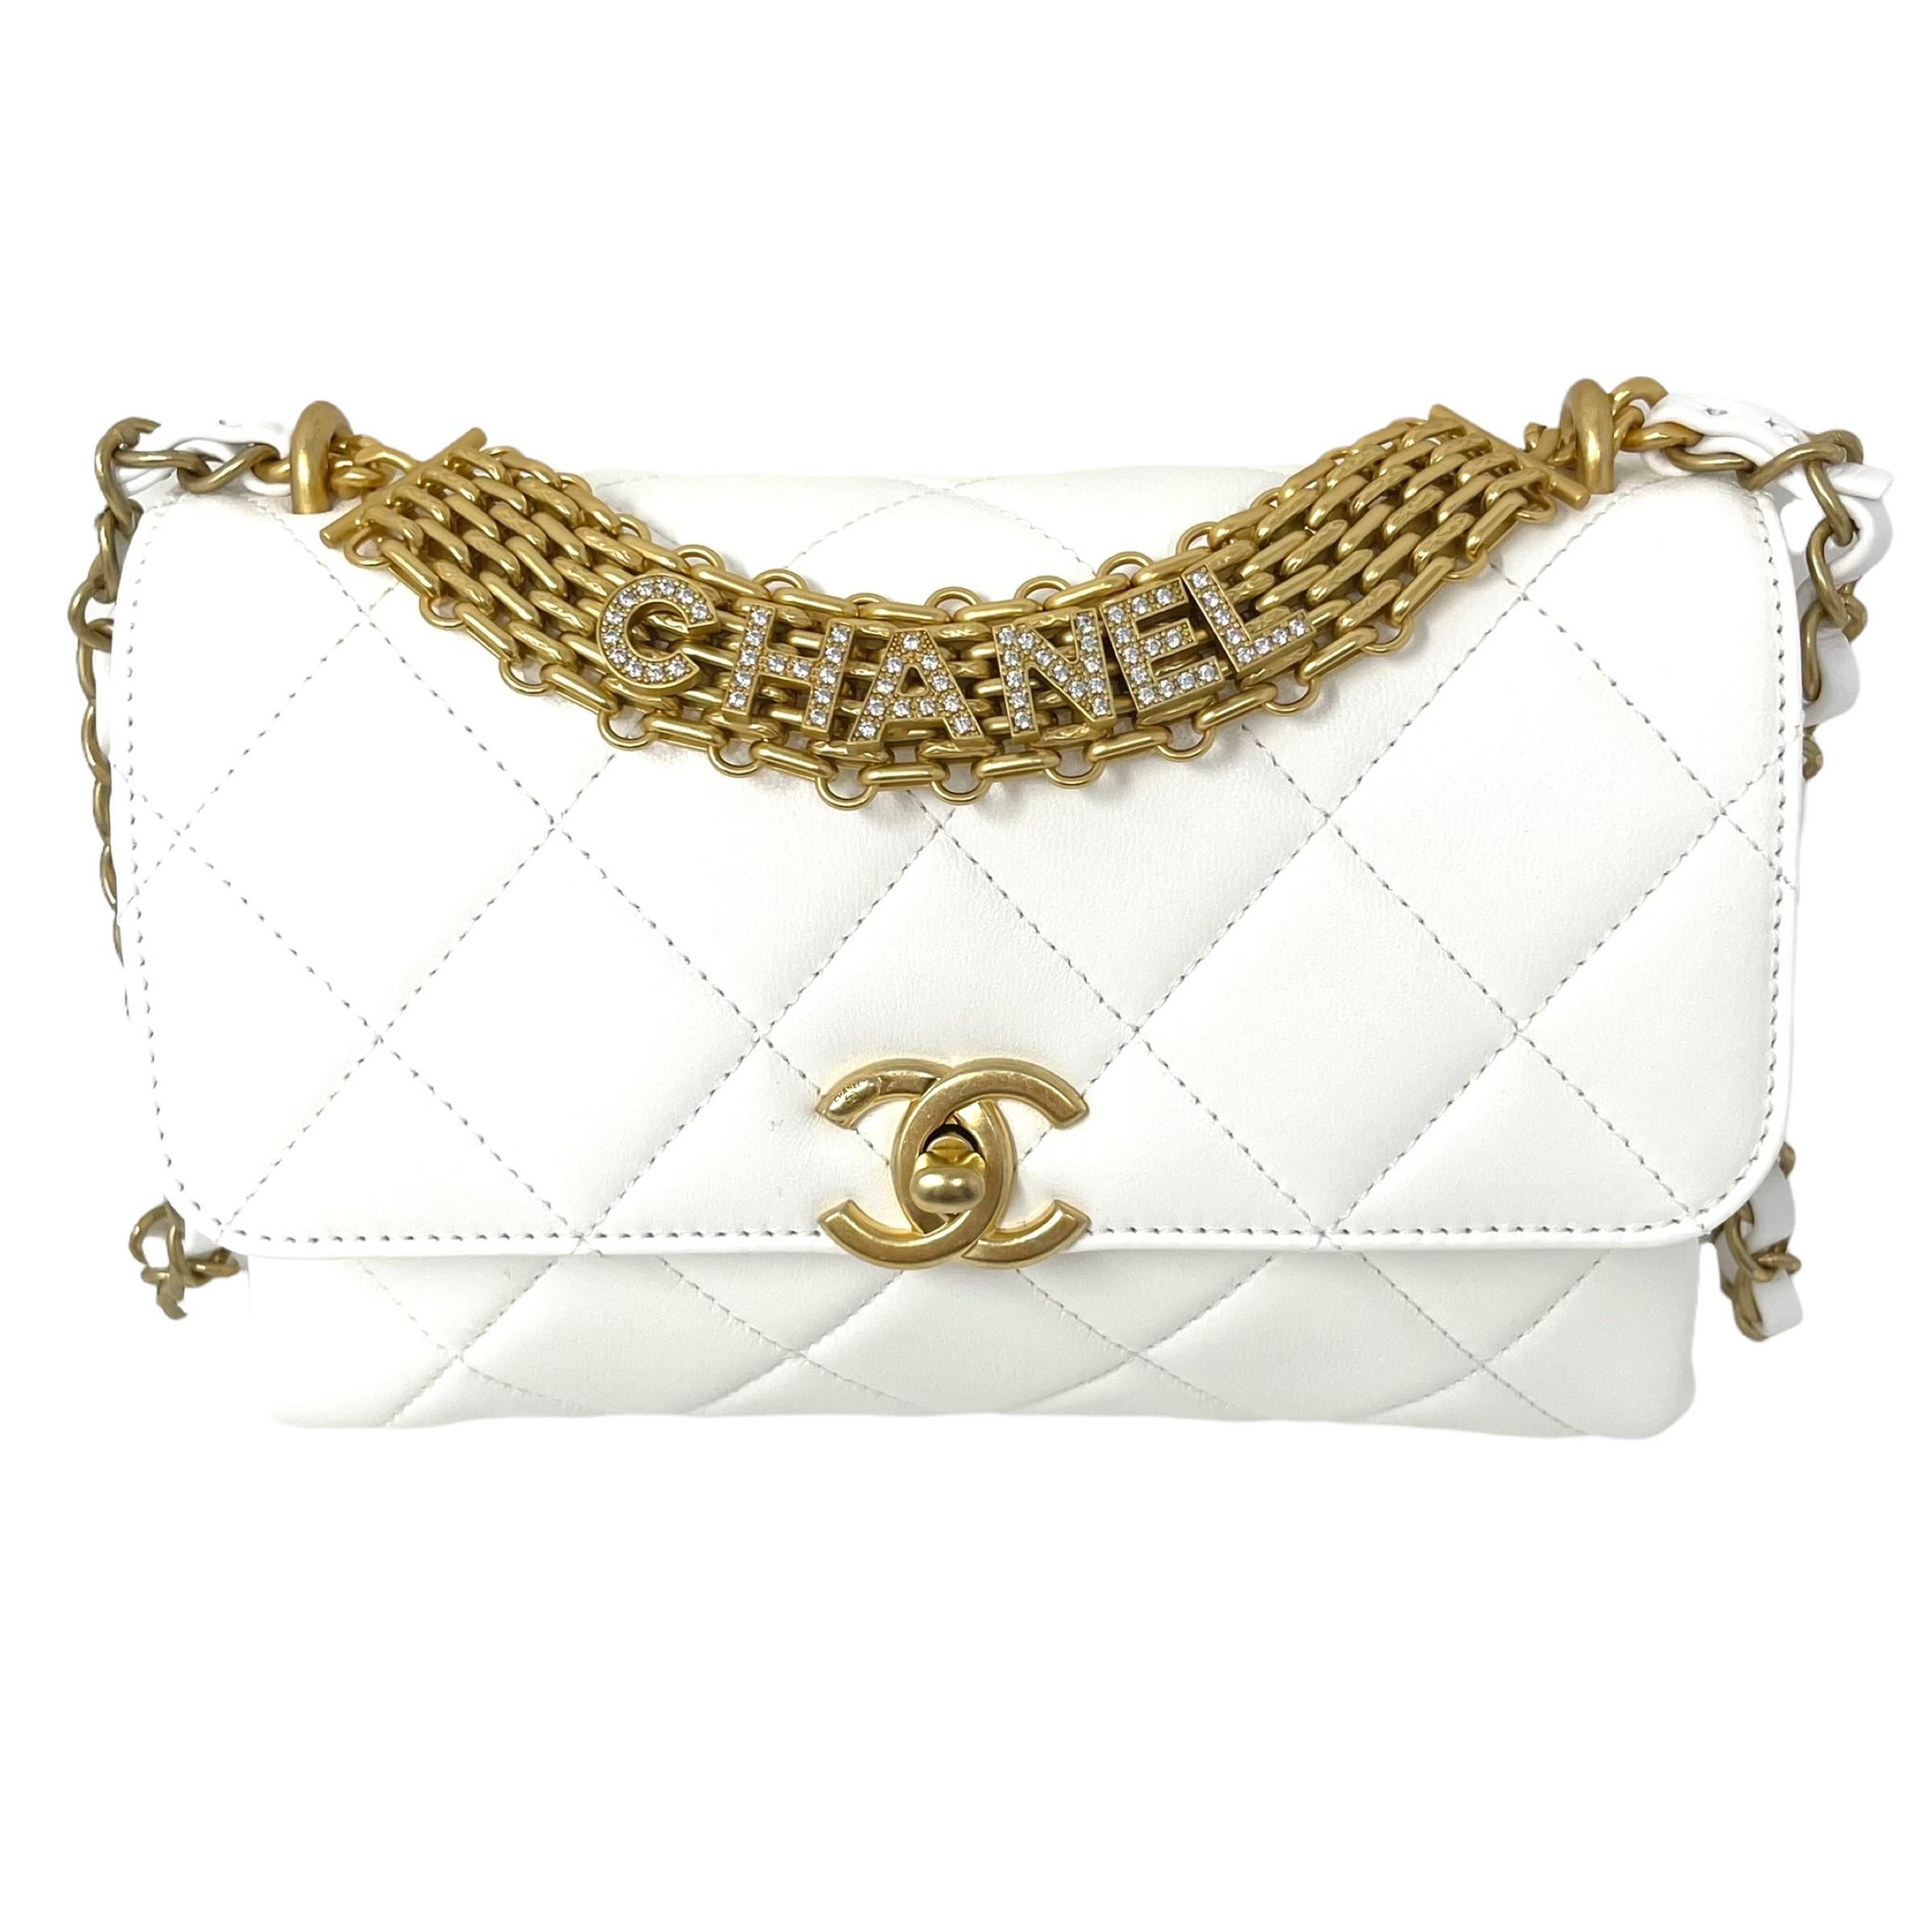 NEW Chanel White Small Flap Bag Quilted Leather Crossbody Bag For Sale 1